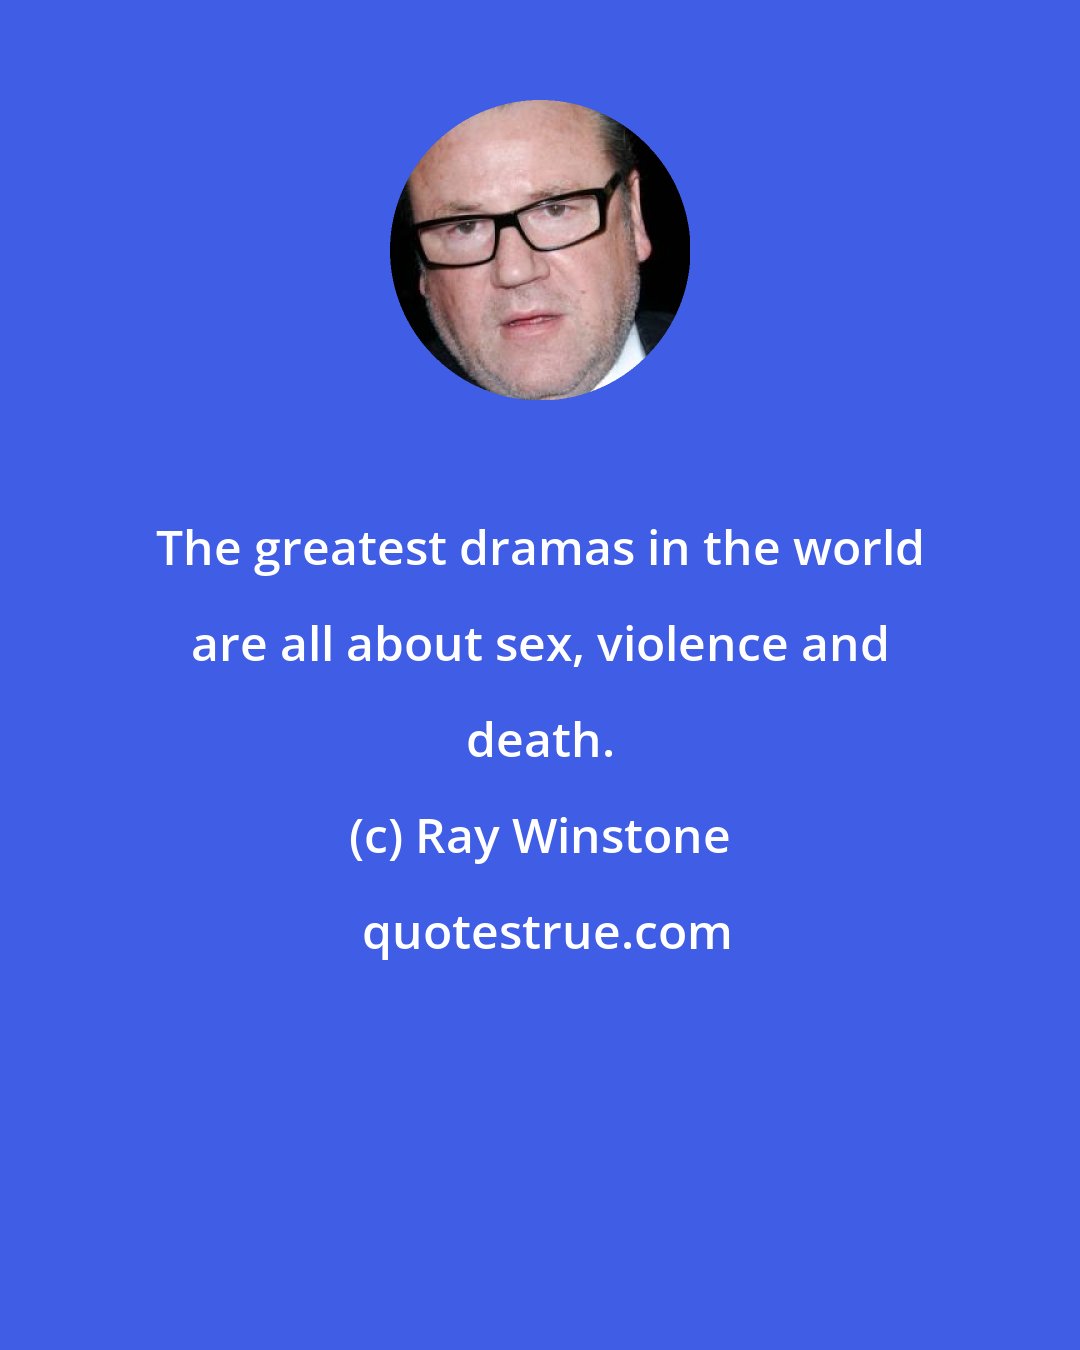 Ray Winstone: The greatest dramas in the world are all about sex, violence and death.